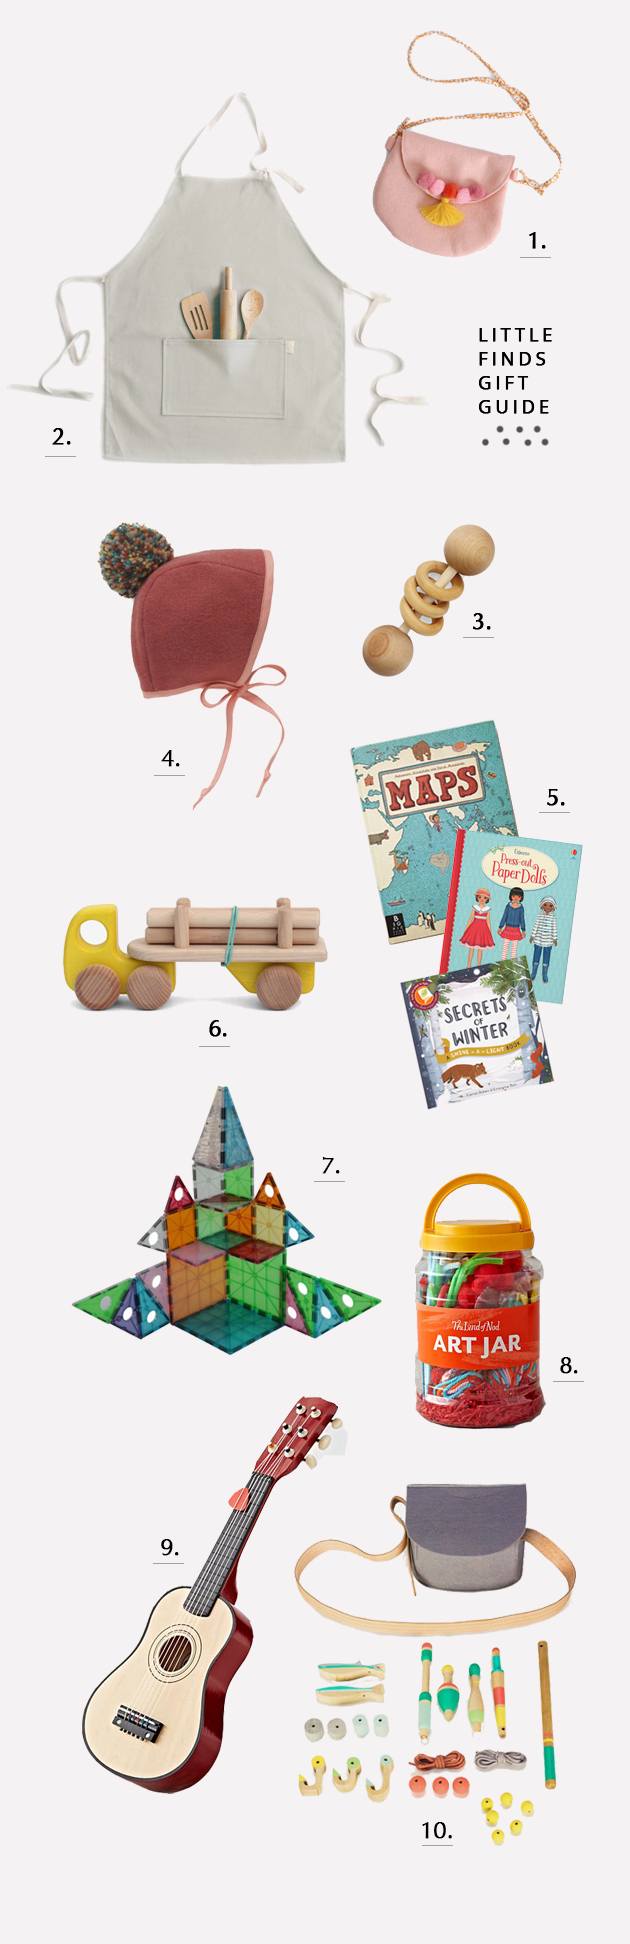 little-finds-gift-guide